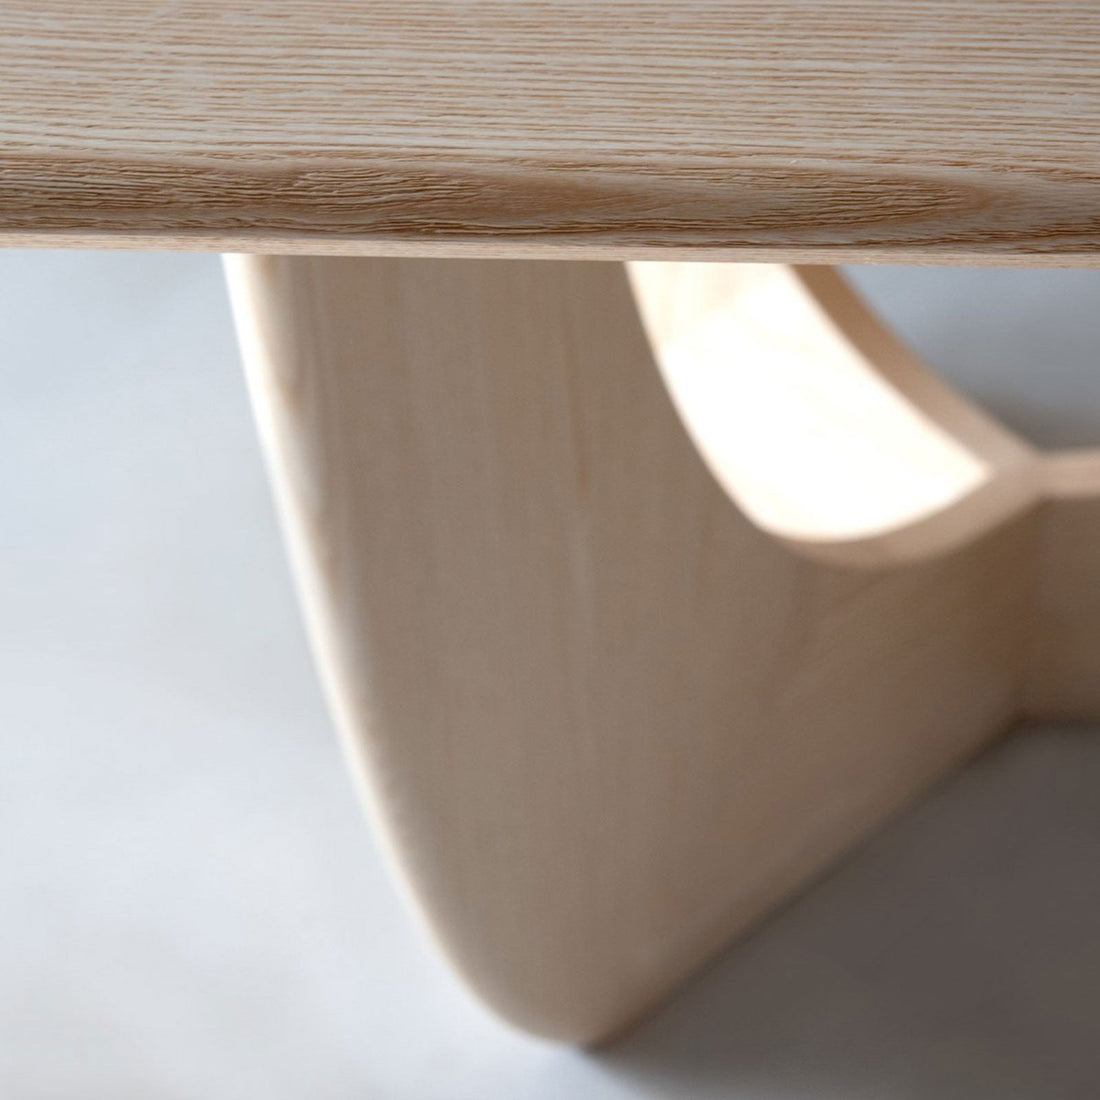 Cala | Dining Table